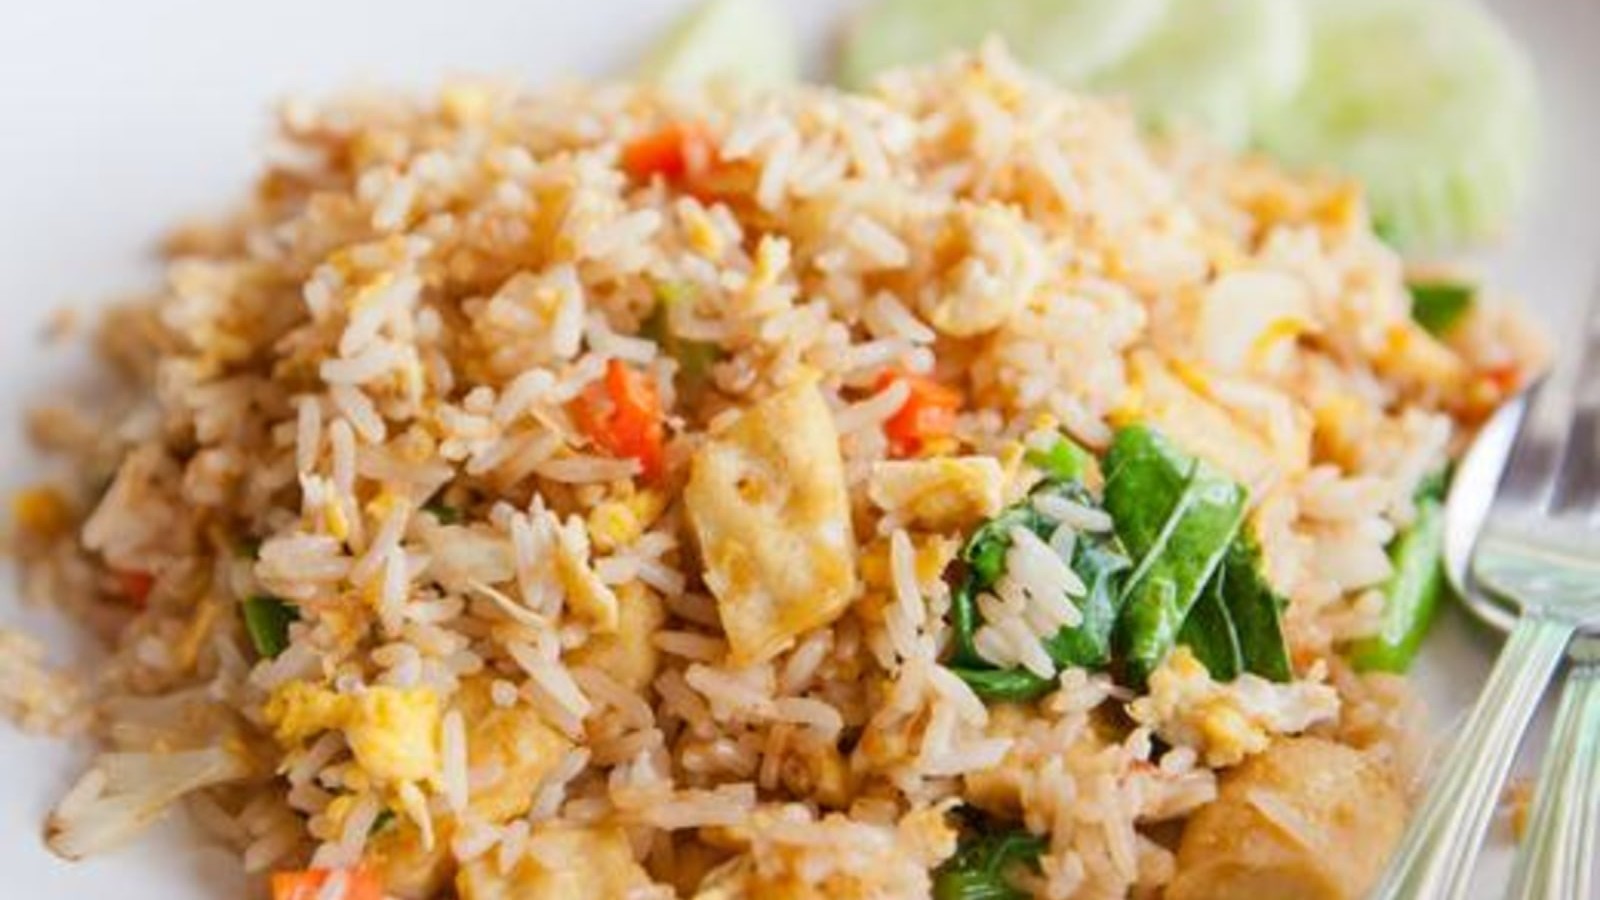 Image of Tofu Fried Rice: A Healthy, Vegetarian Recipe With Fried Rice